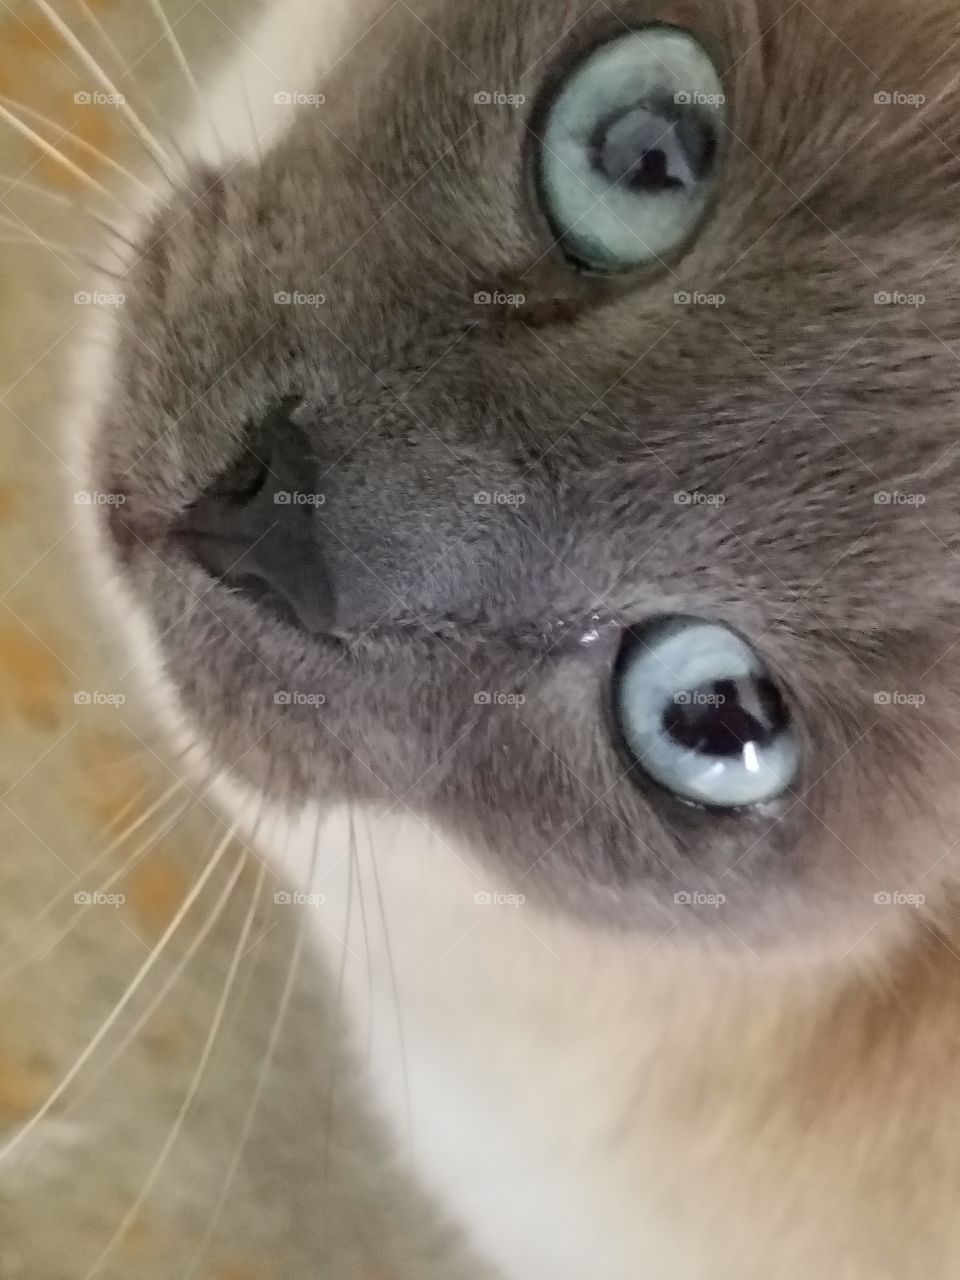 Close-up of a cat looking up